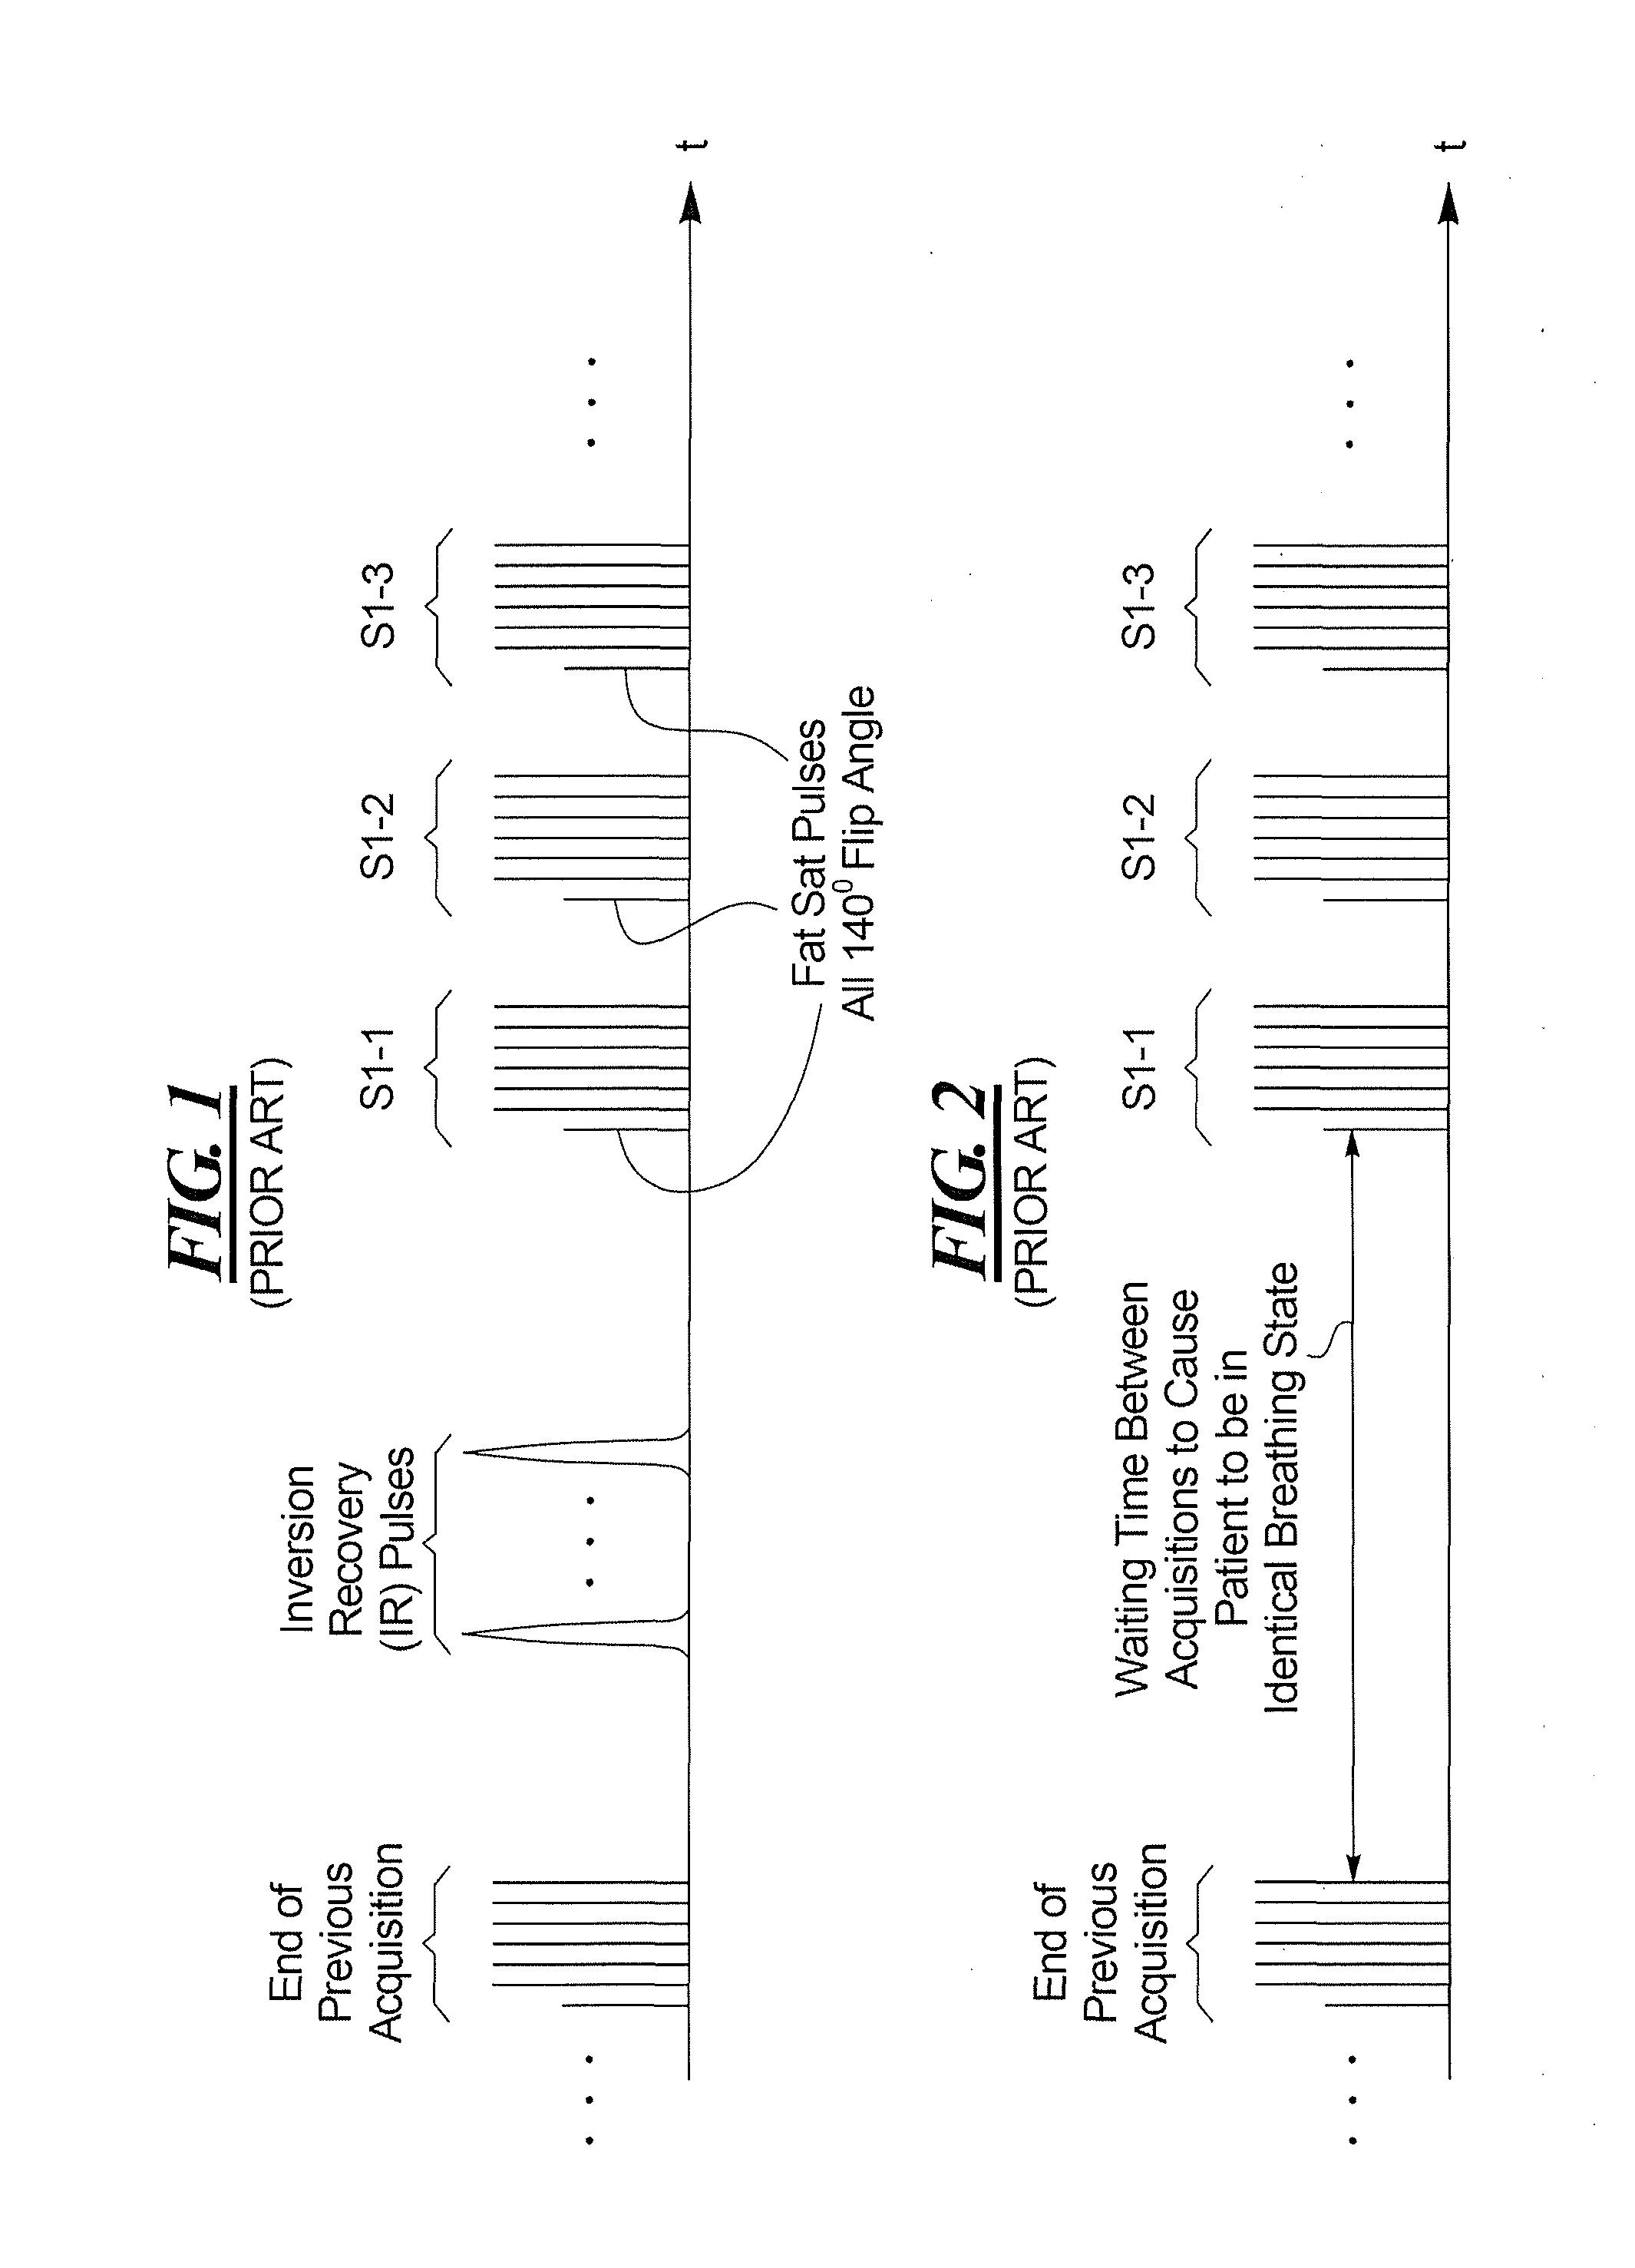 Method and apparatus for acquisition of magnetic resonance data with fat saturation pulses radiated with respectively different flip angles